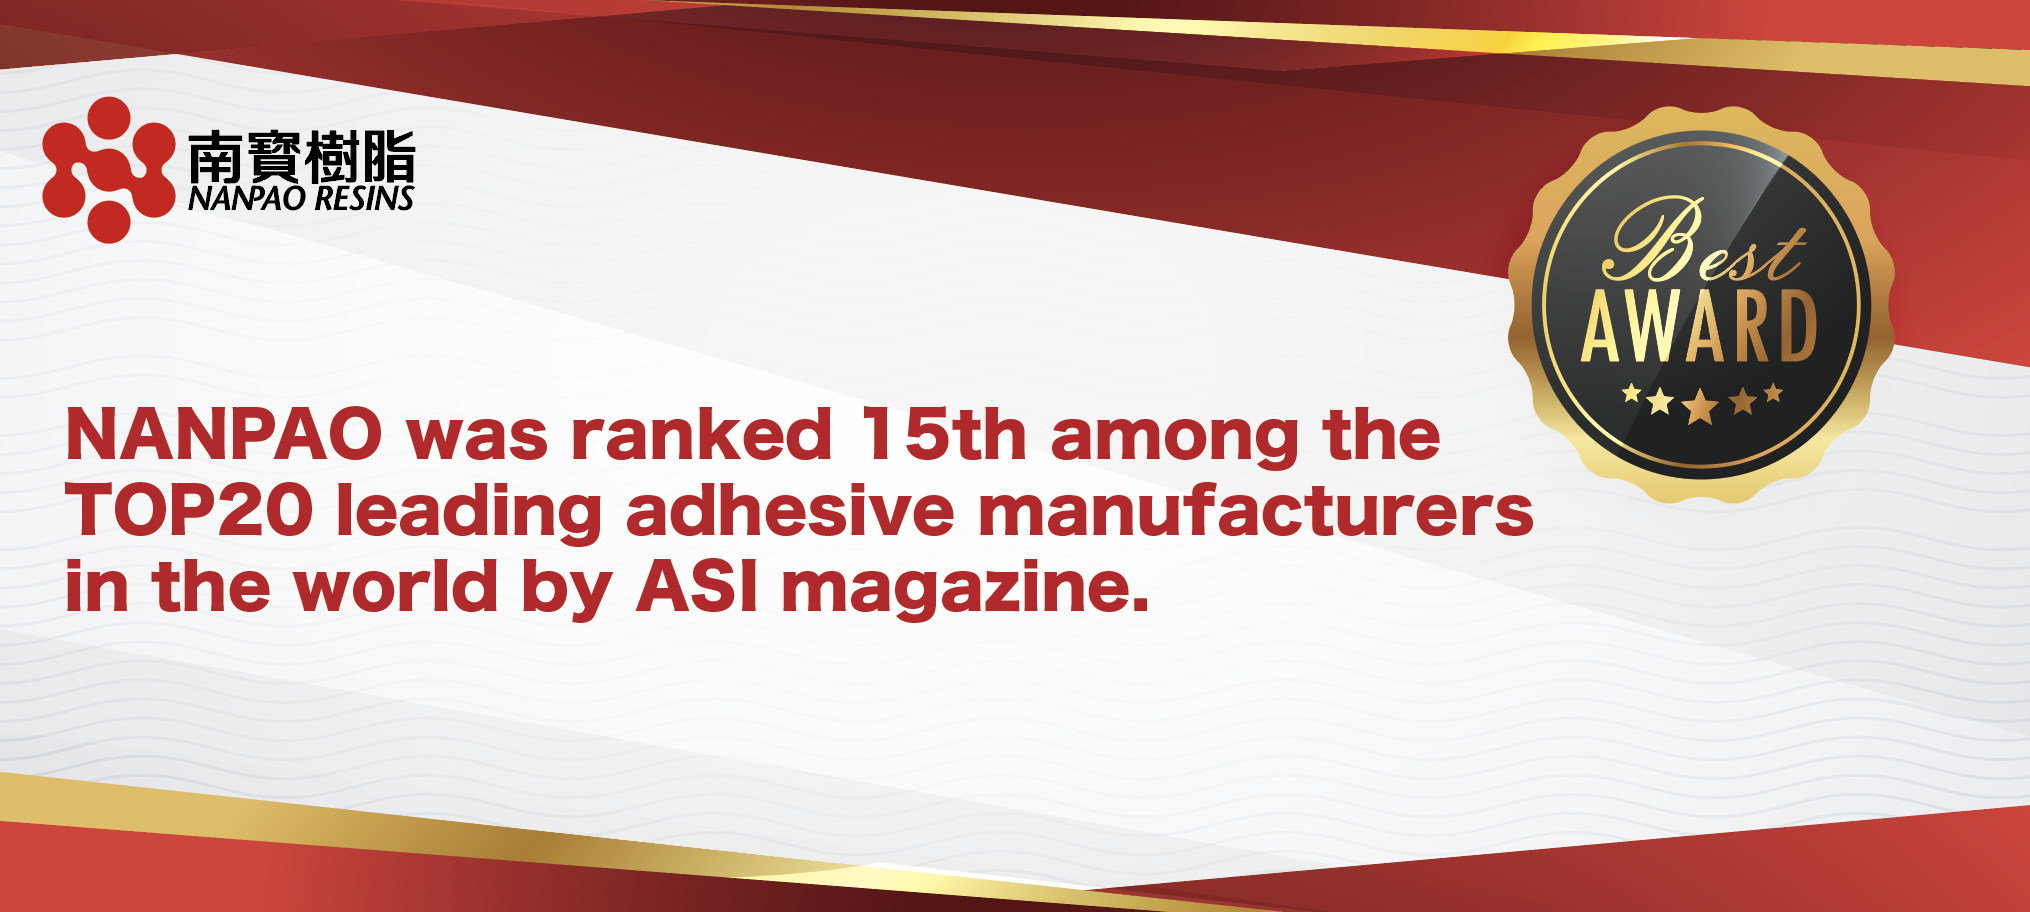 NANPAO was ranked 15th among the TOP20 leading adhesive manufacturers in the world by ASI magazine.